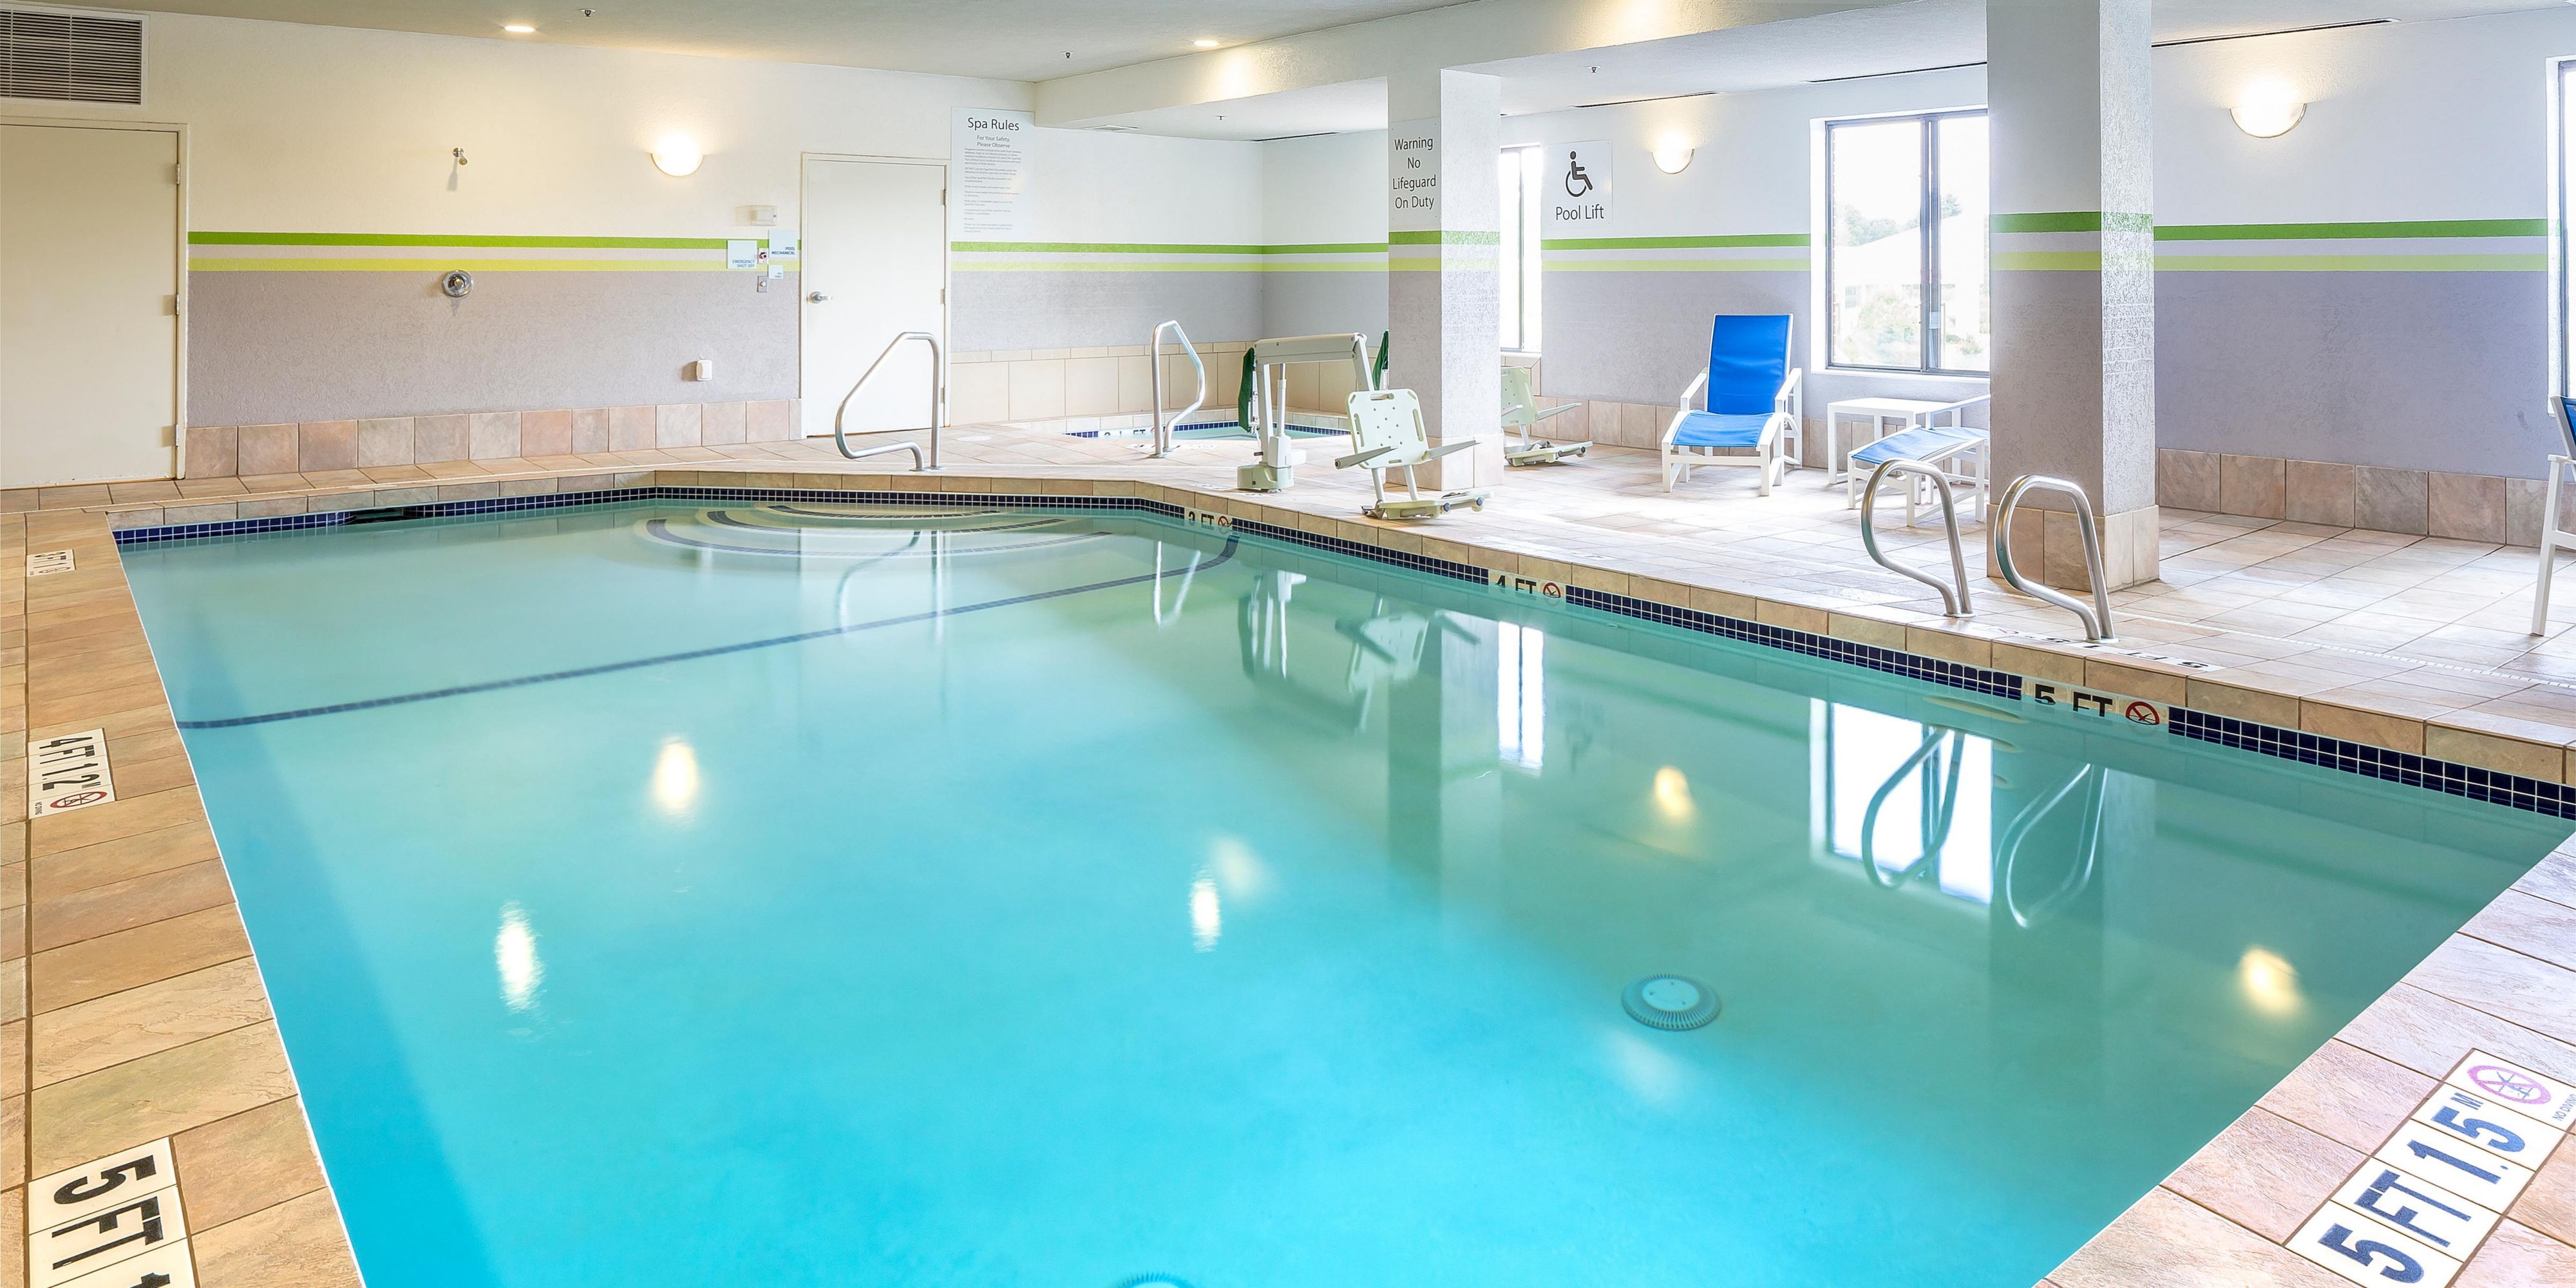 Check out our heated, indoor pool while visiting Manchester, NH. Try our whirlpool! Great for kids.